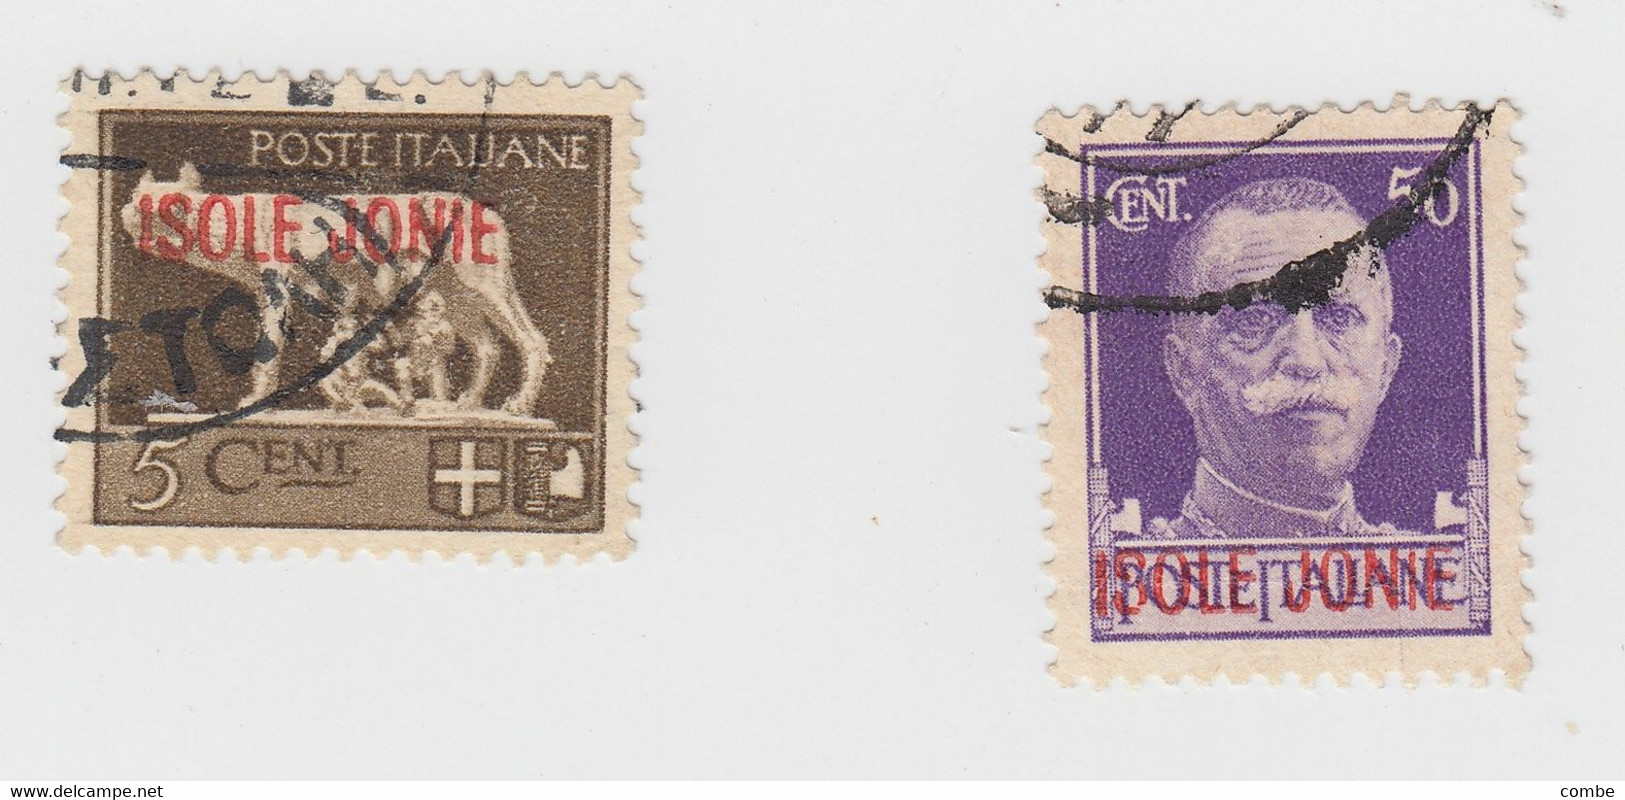 ISOLE JONIE. 2 STAMPS  / 7157 - Isole Ionie